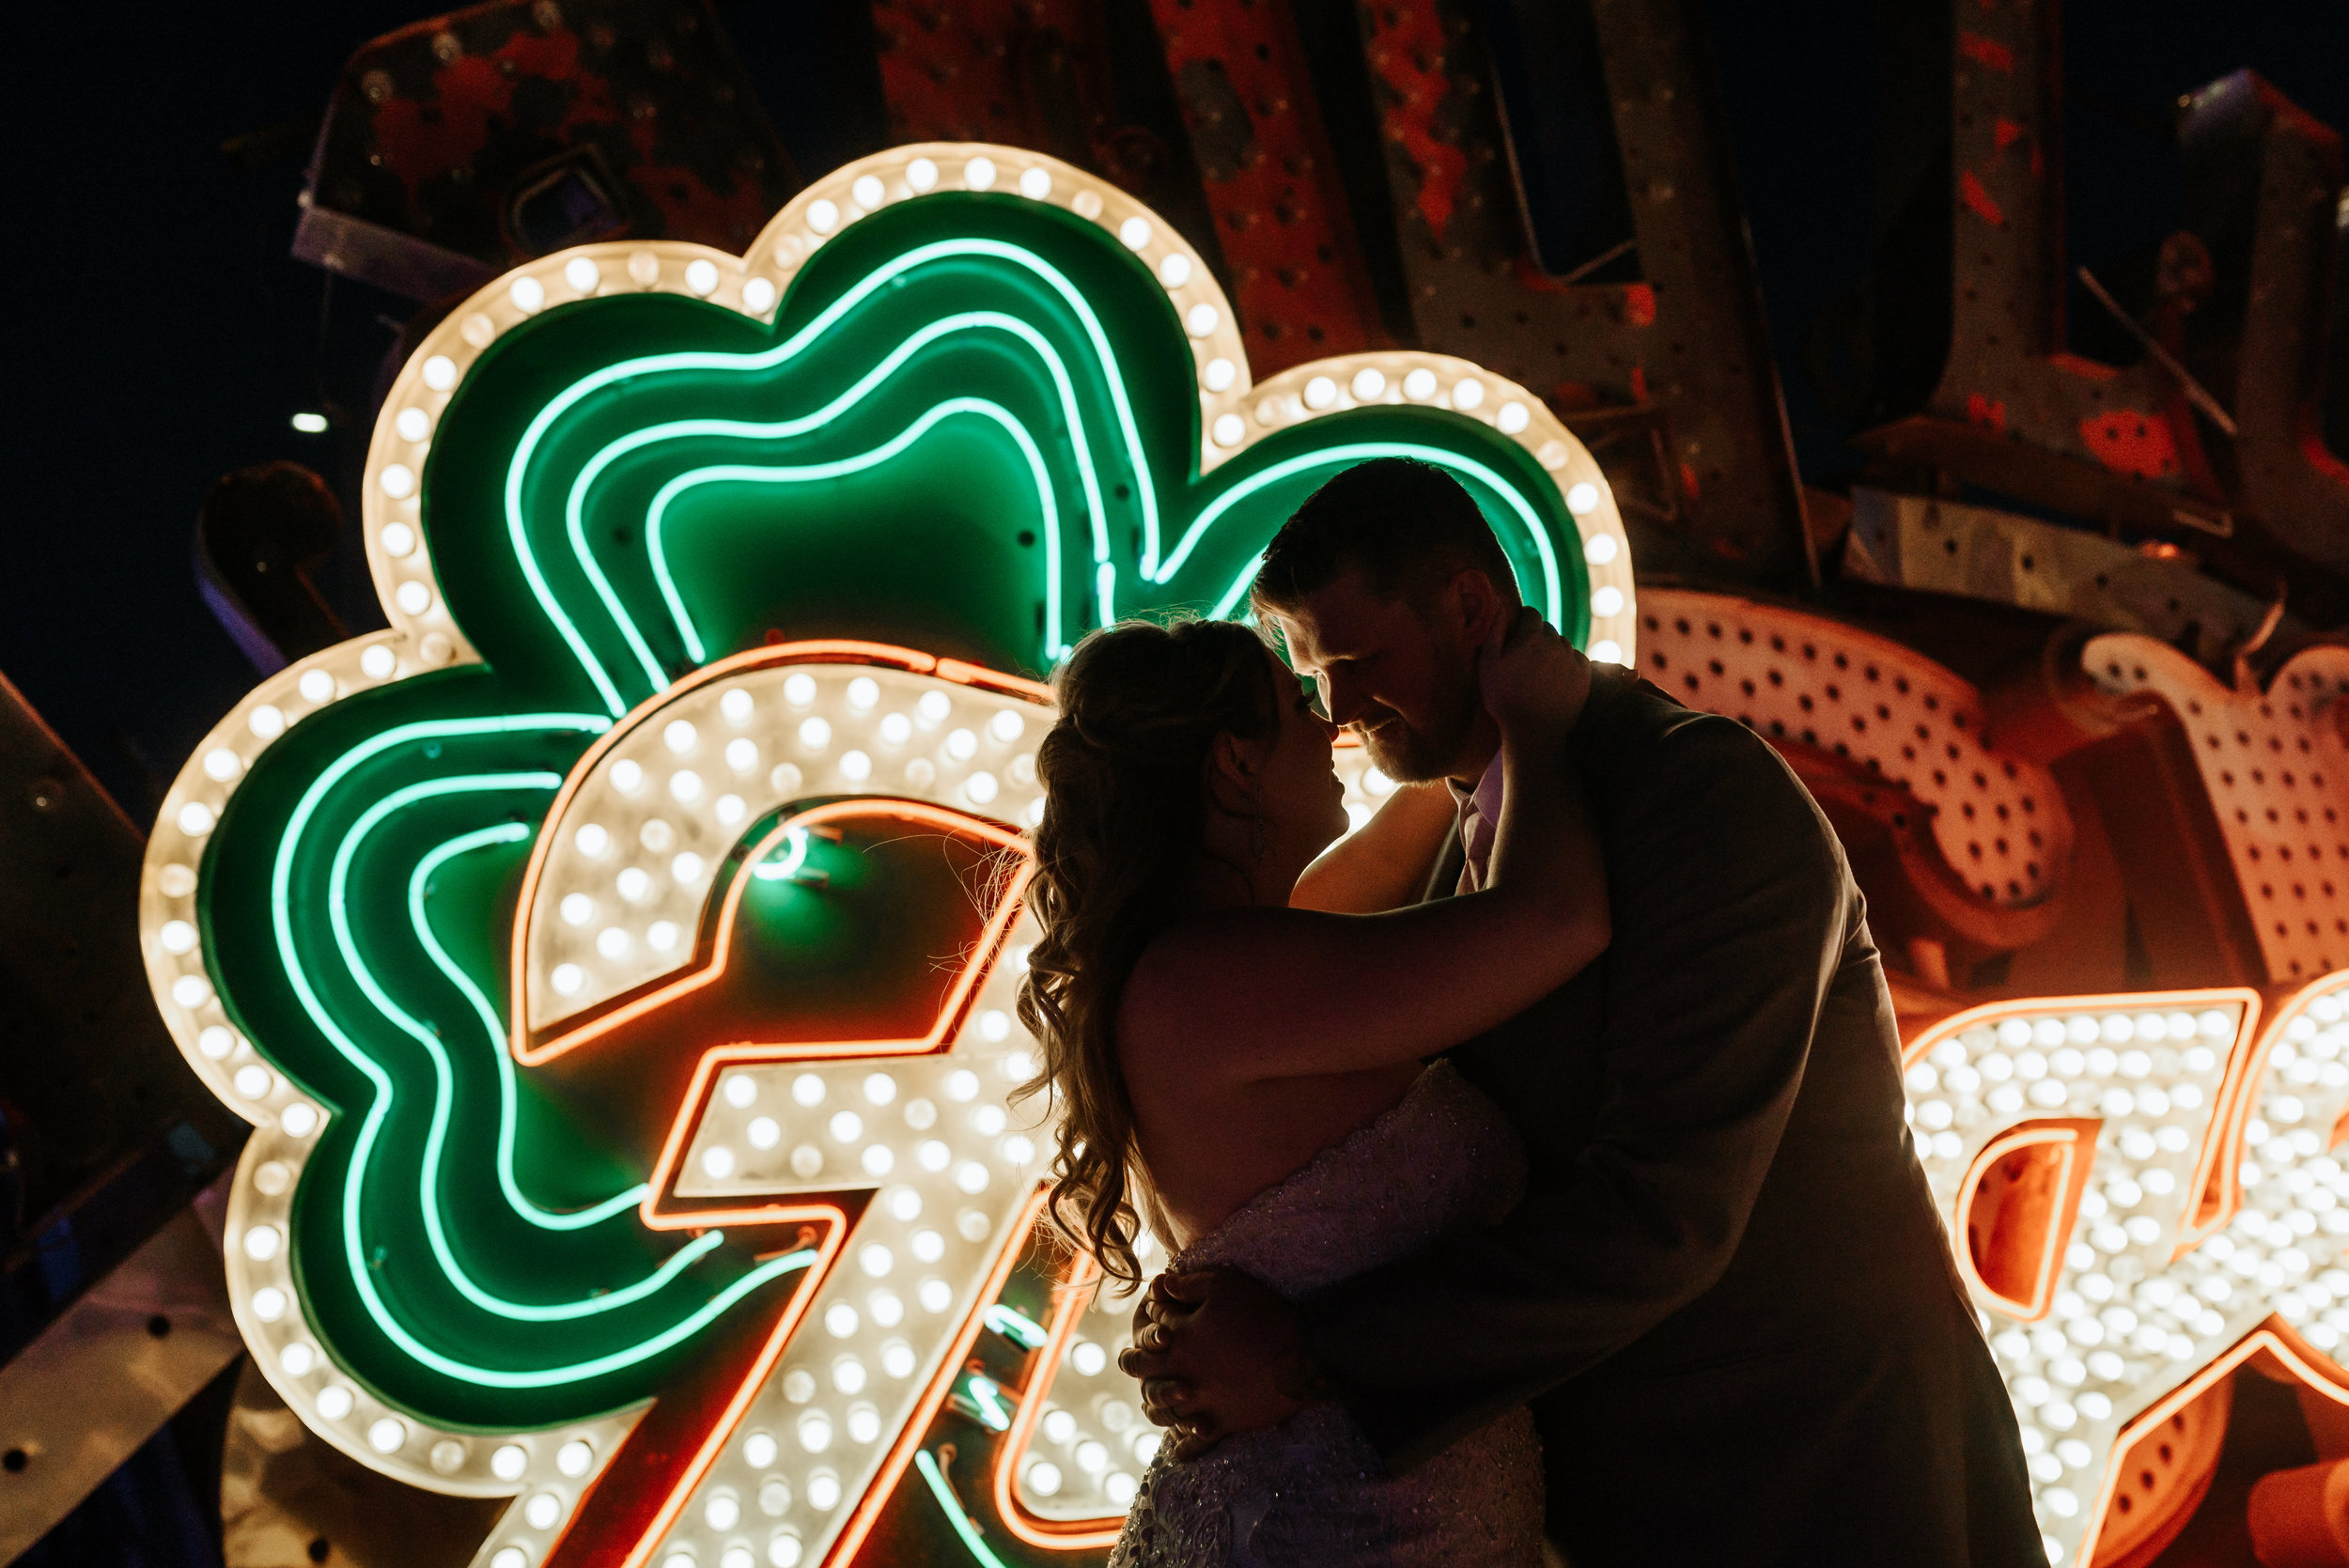 Neon-Museum-Wedding-Las-Vegas-Nevada-Golden-Nugget-Photography-by-V-Ally-and-Dan-3370.jpg